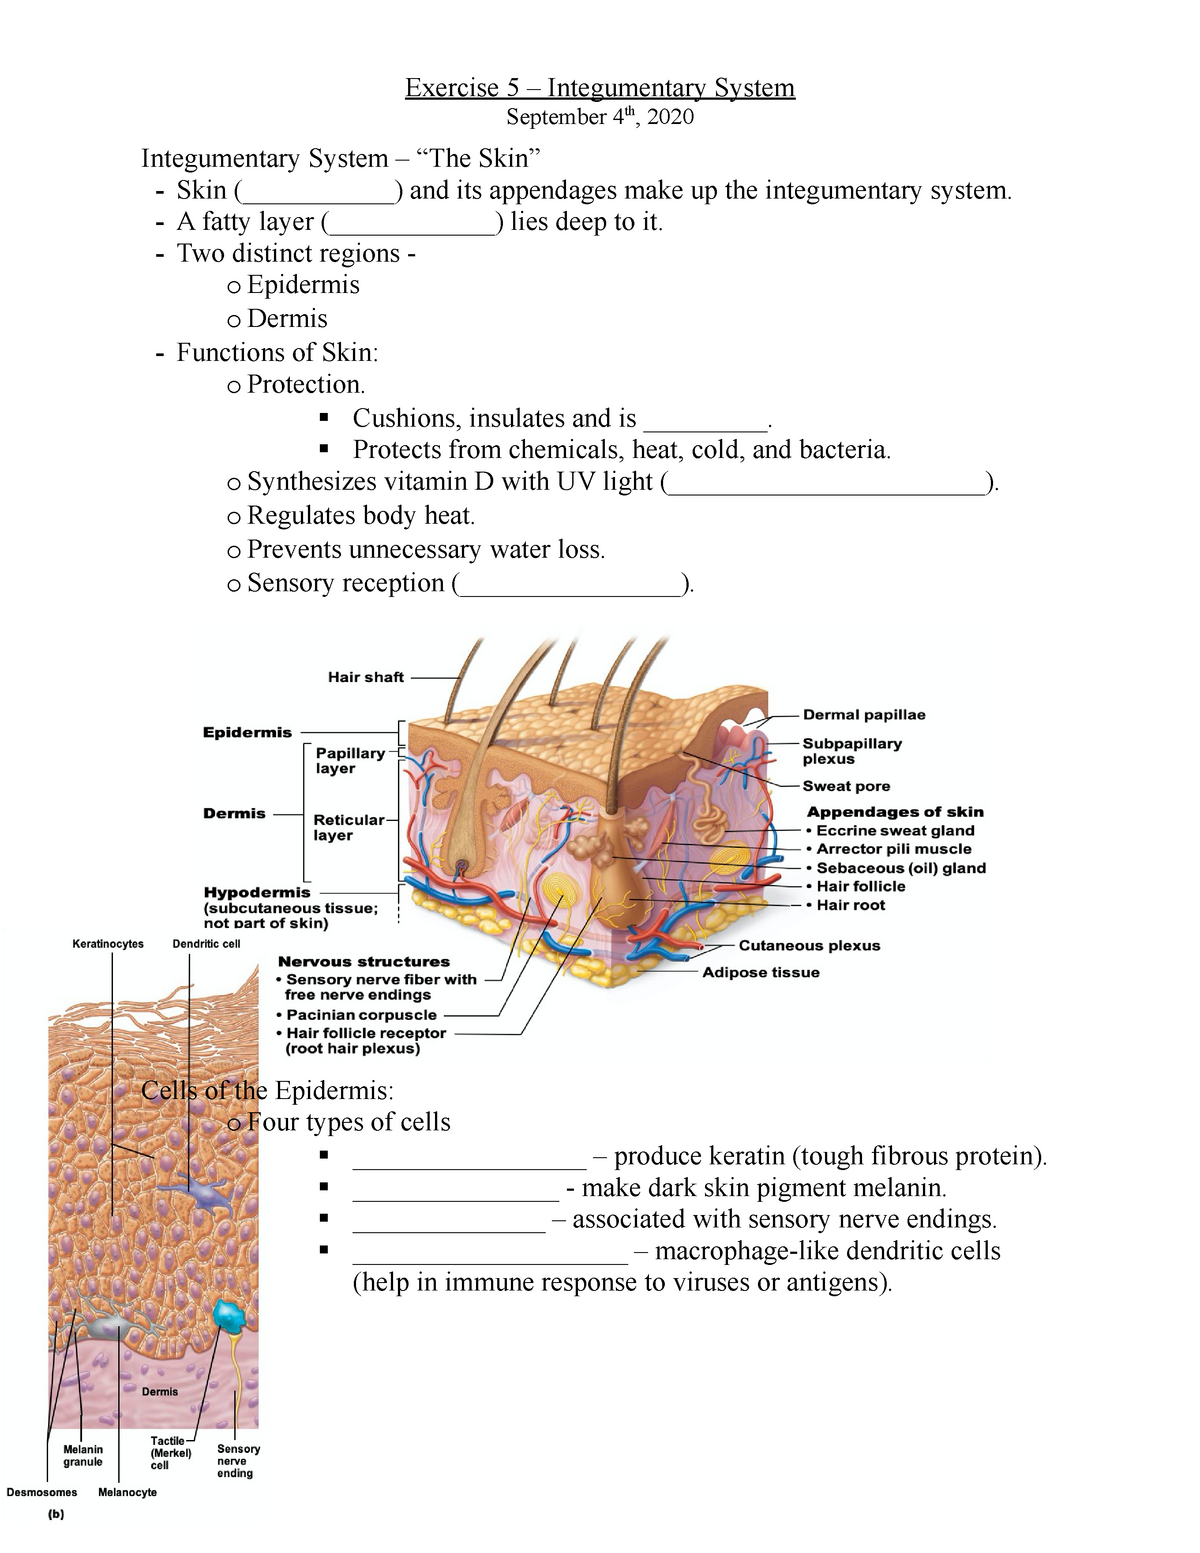 Exercise 22 - Integumentary System Outline - Exercise 22 With Integumentary System Worksheet Answers